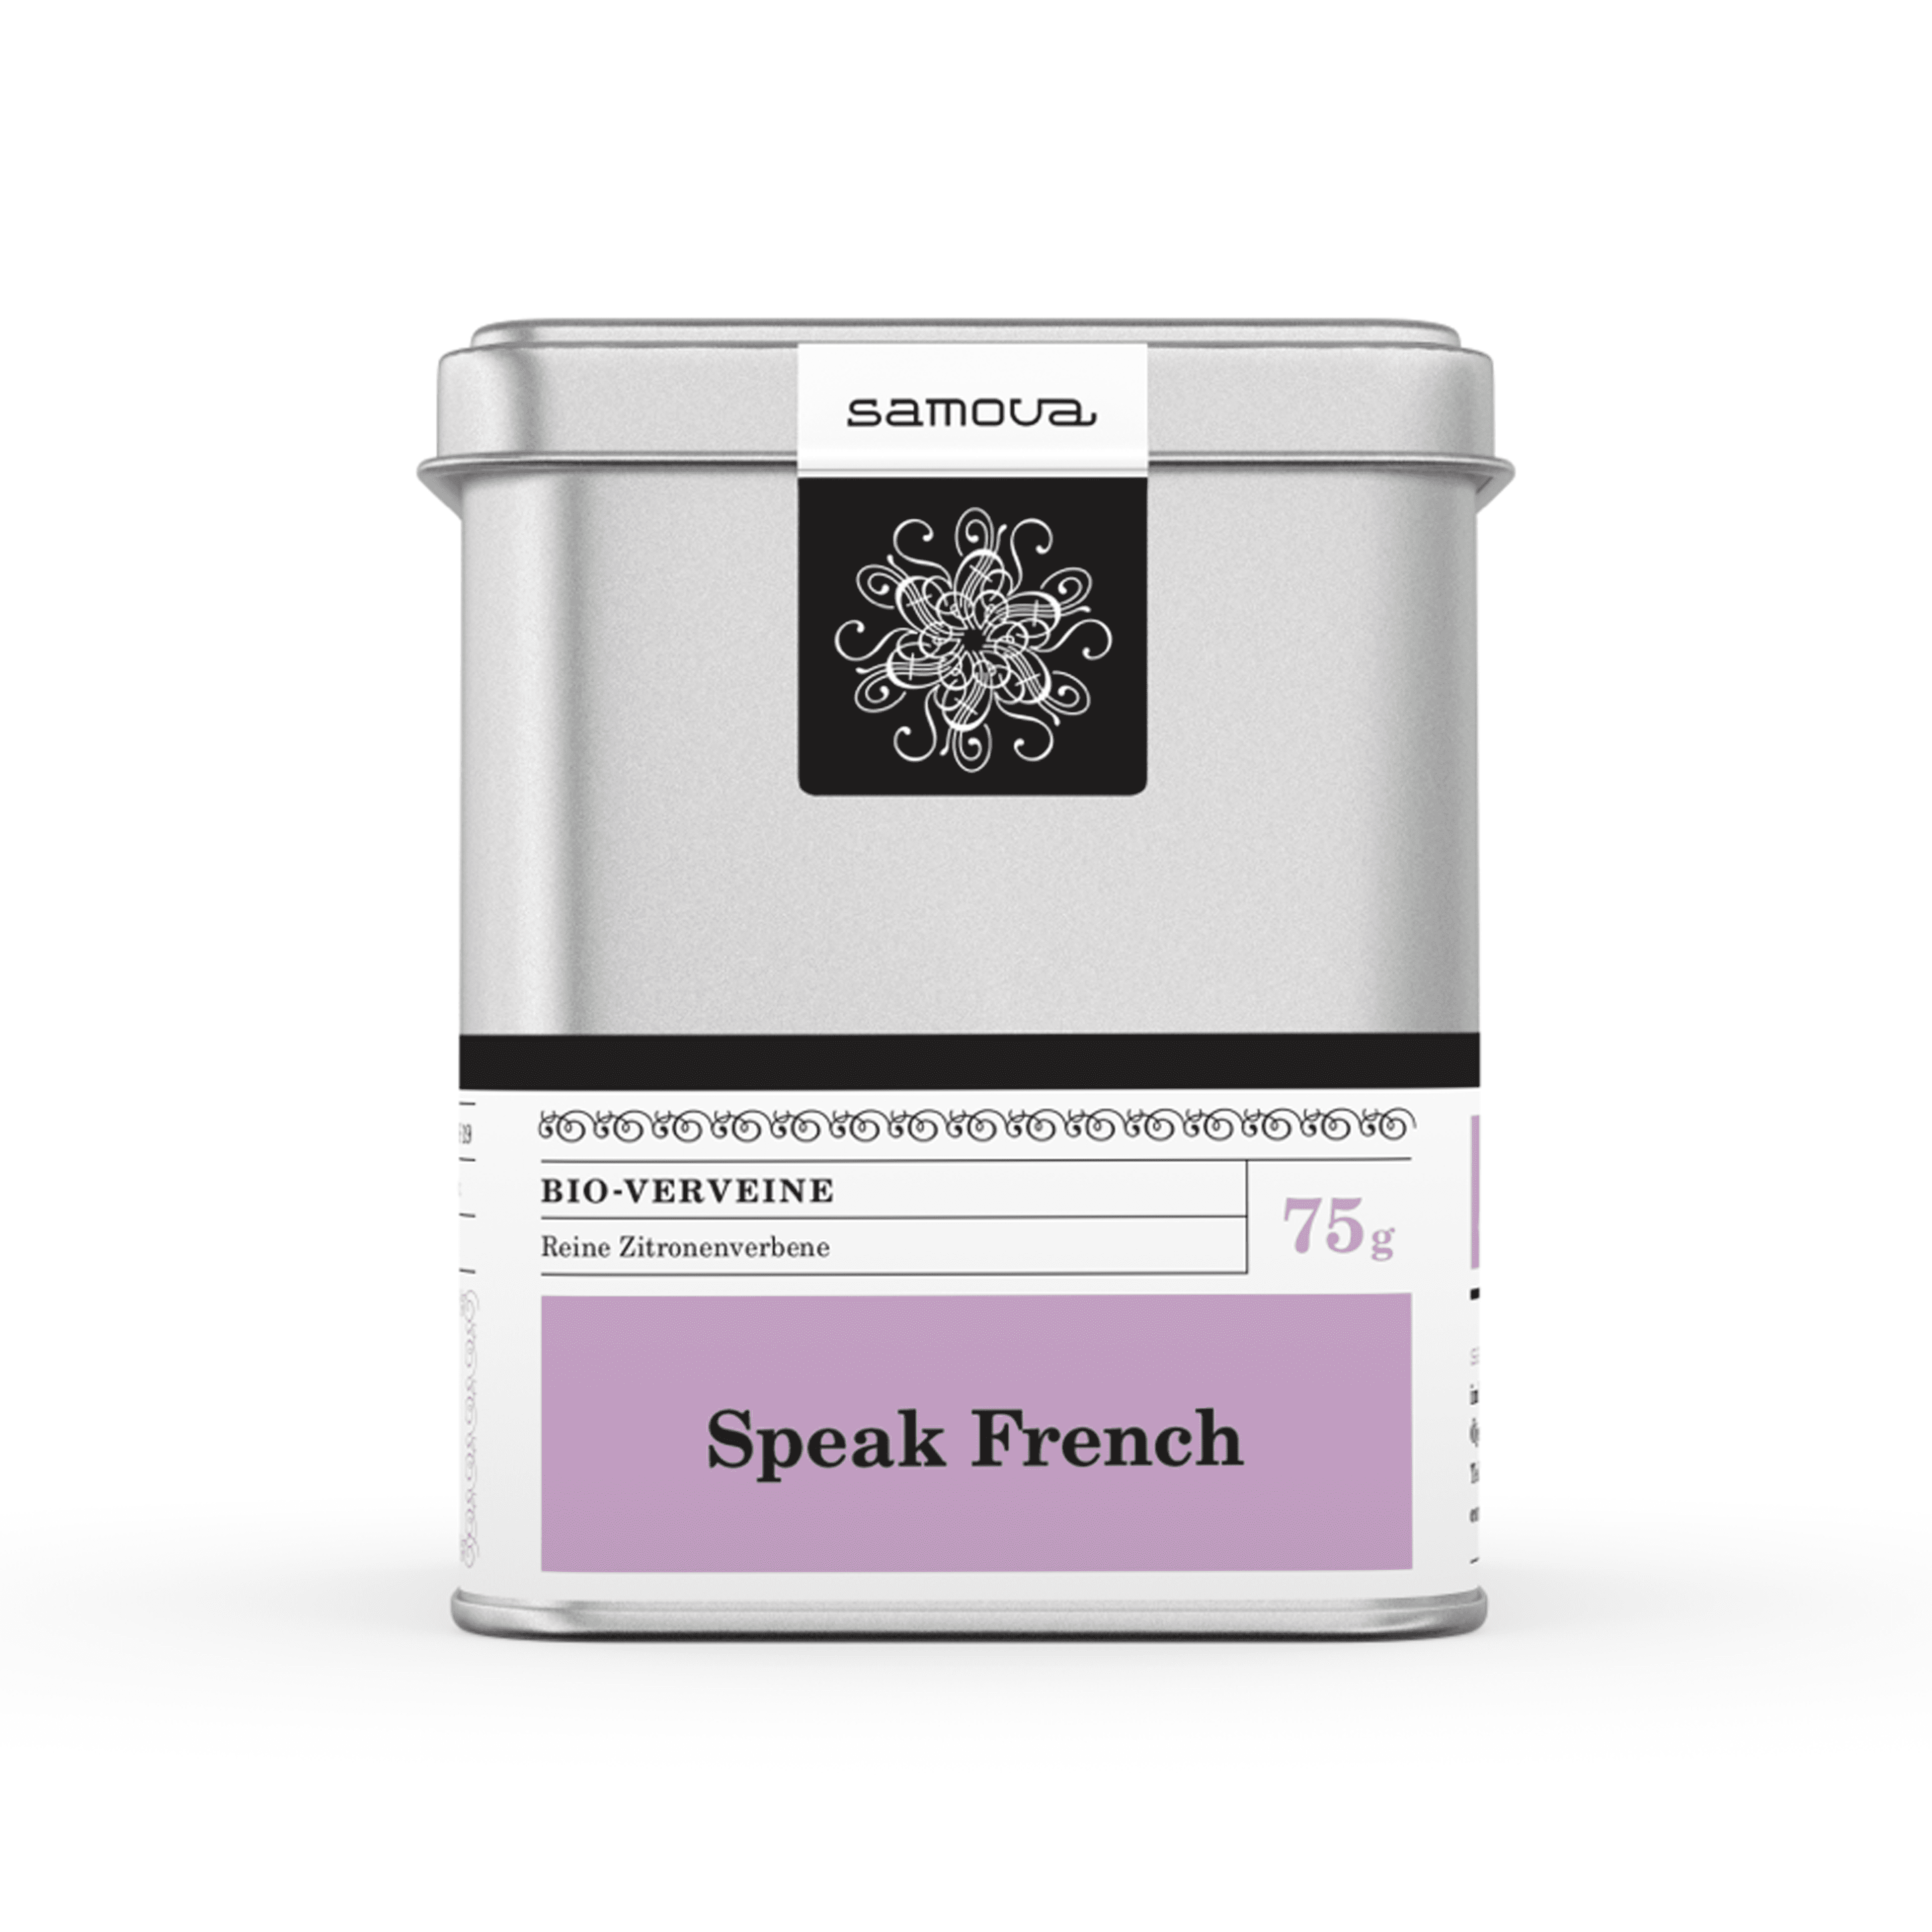 Can of Speak French te